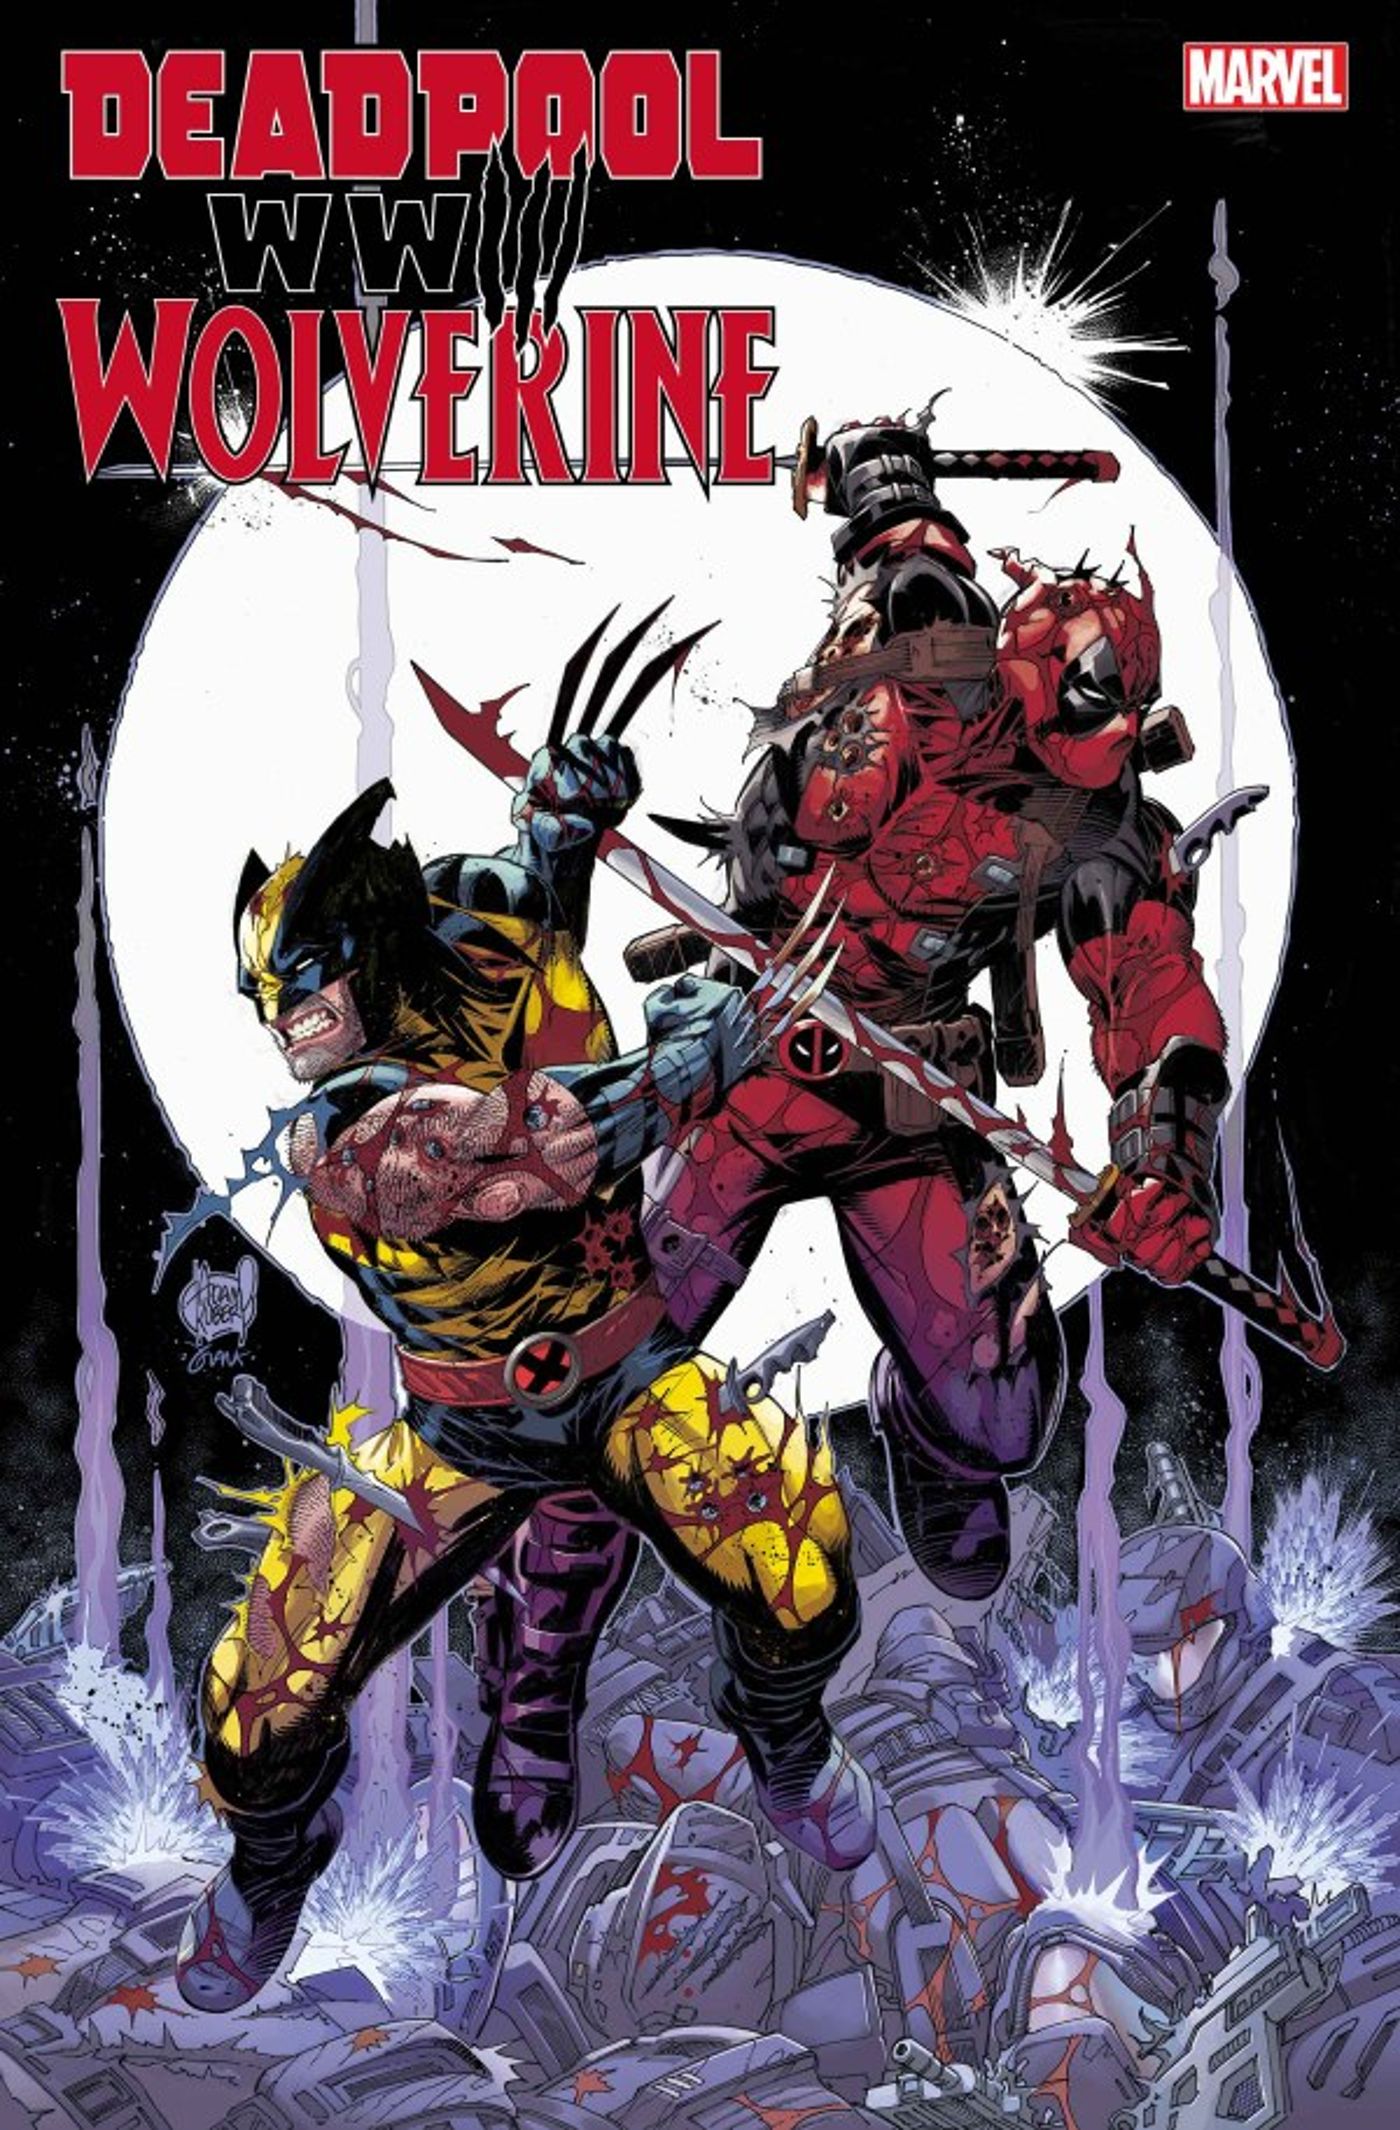 Deadpool & Wolverine: WWIII #1 main cover, the duo slashing their way through a field of enemies